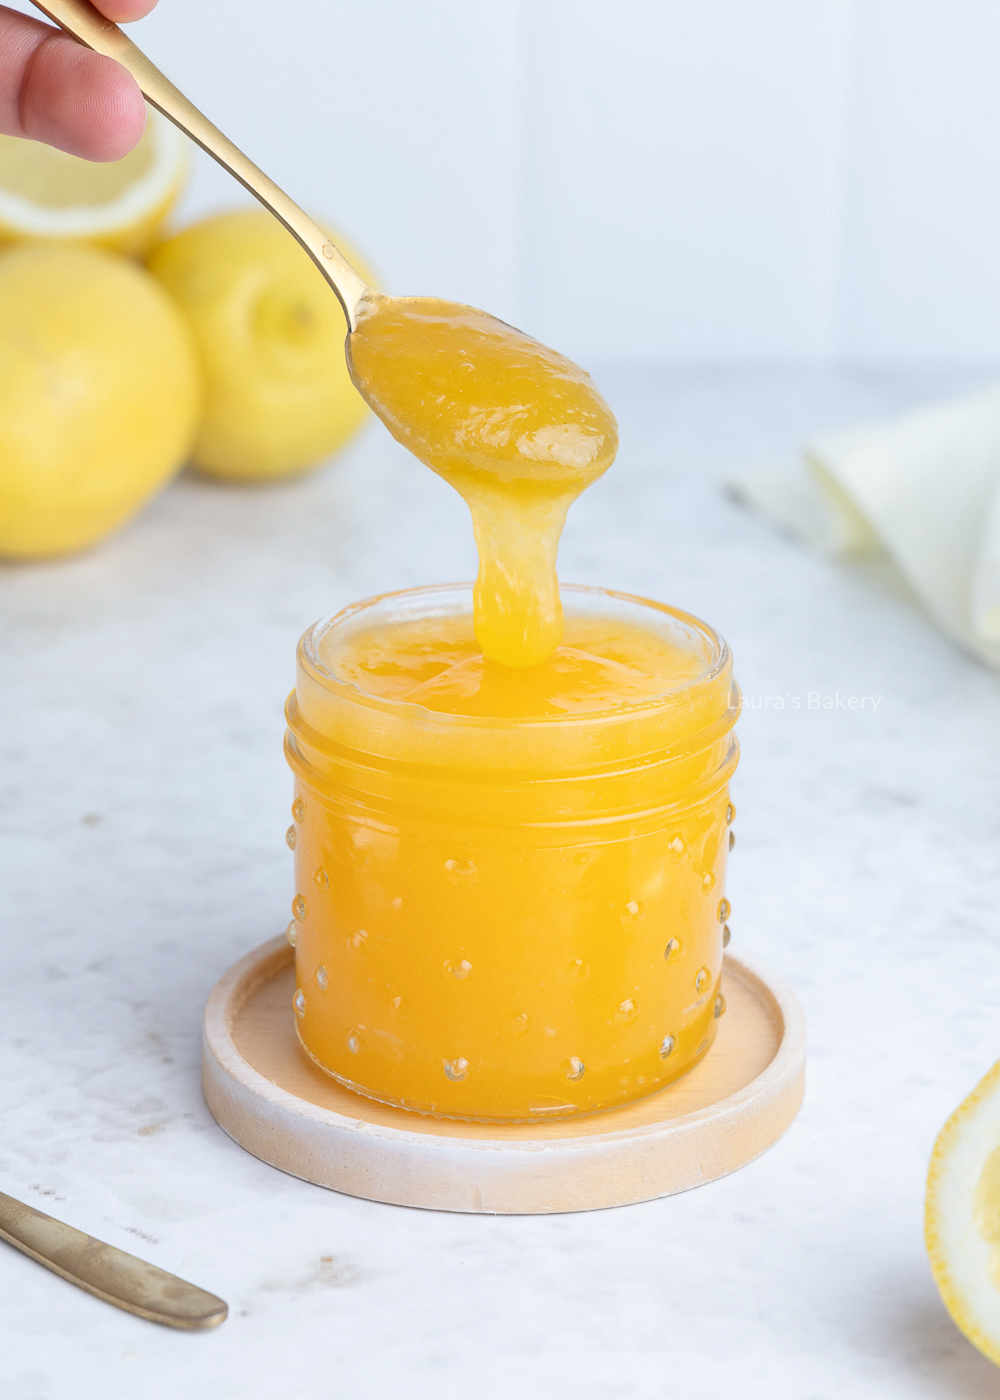 What to eat with lemon curd